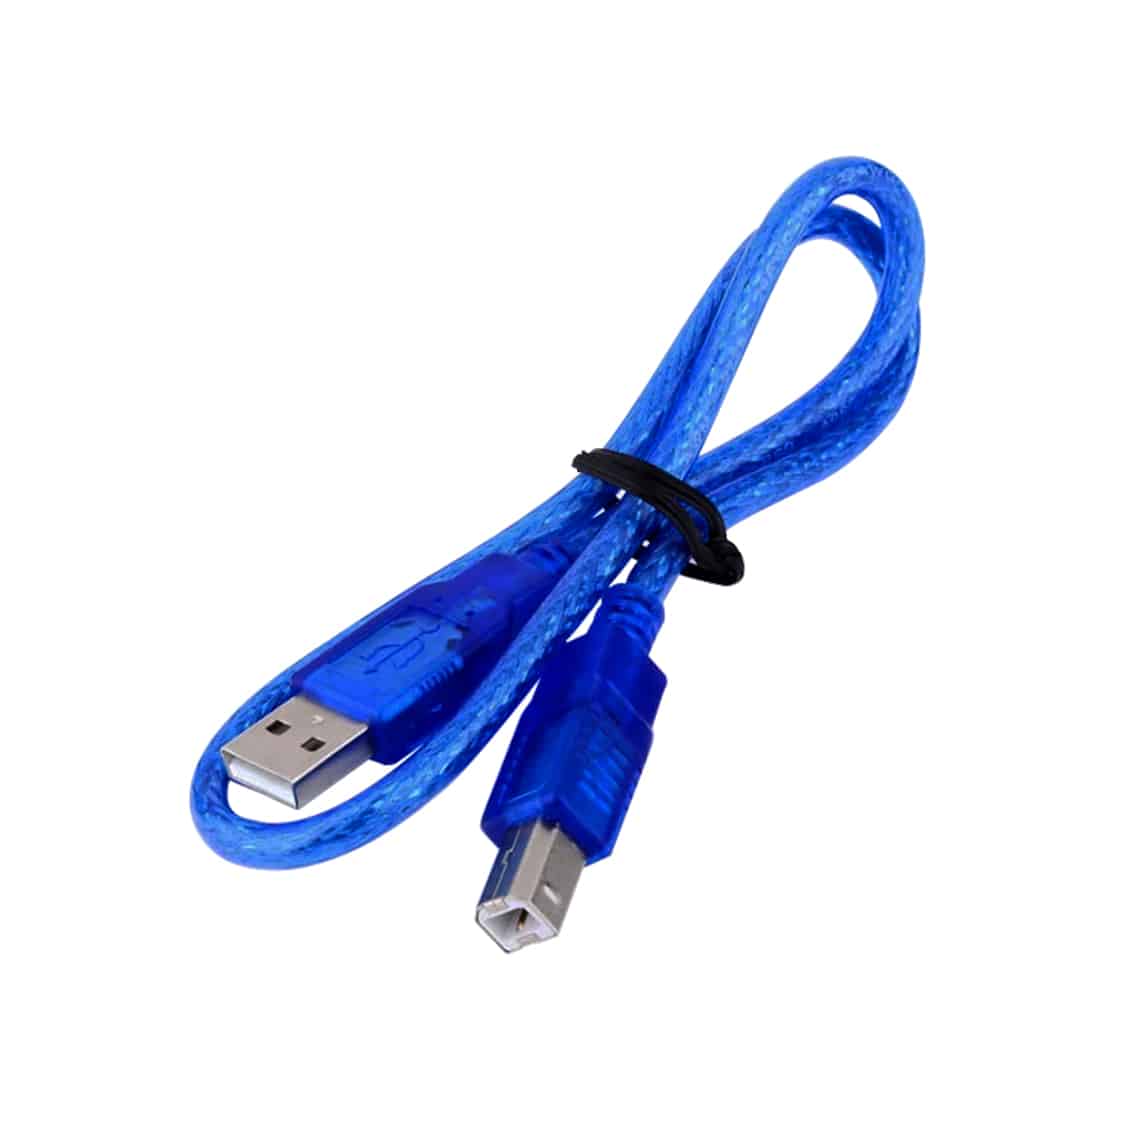 USB A to USB B 30cm Cable - Pack of 2